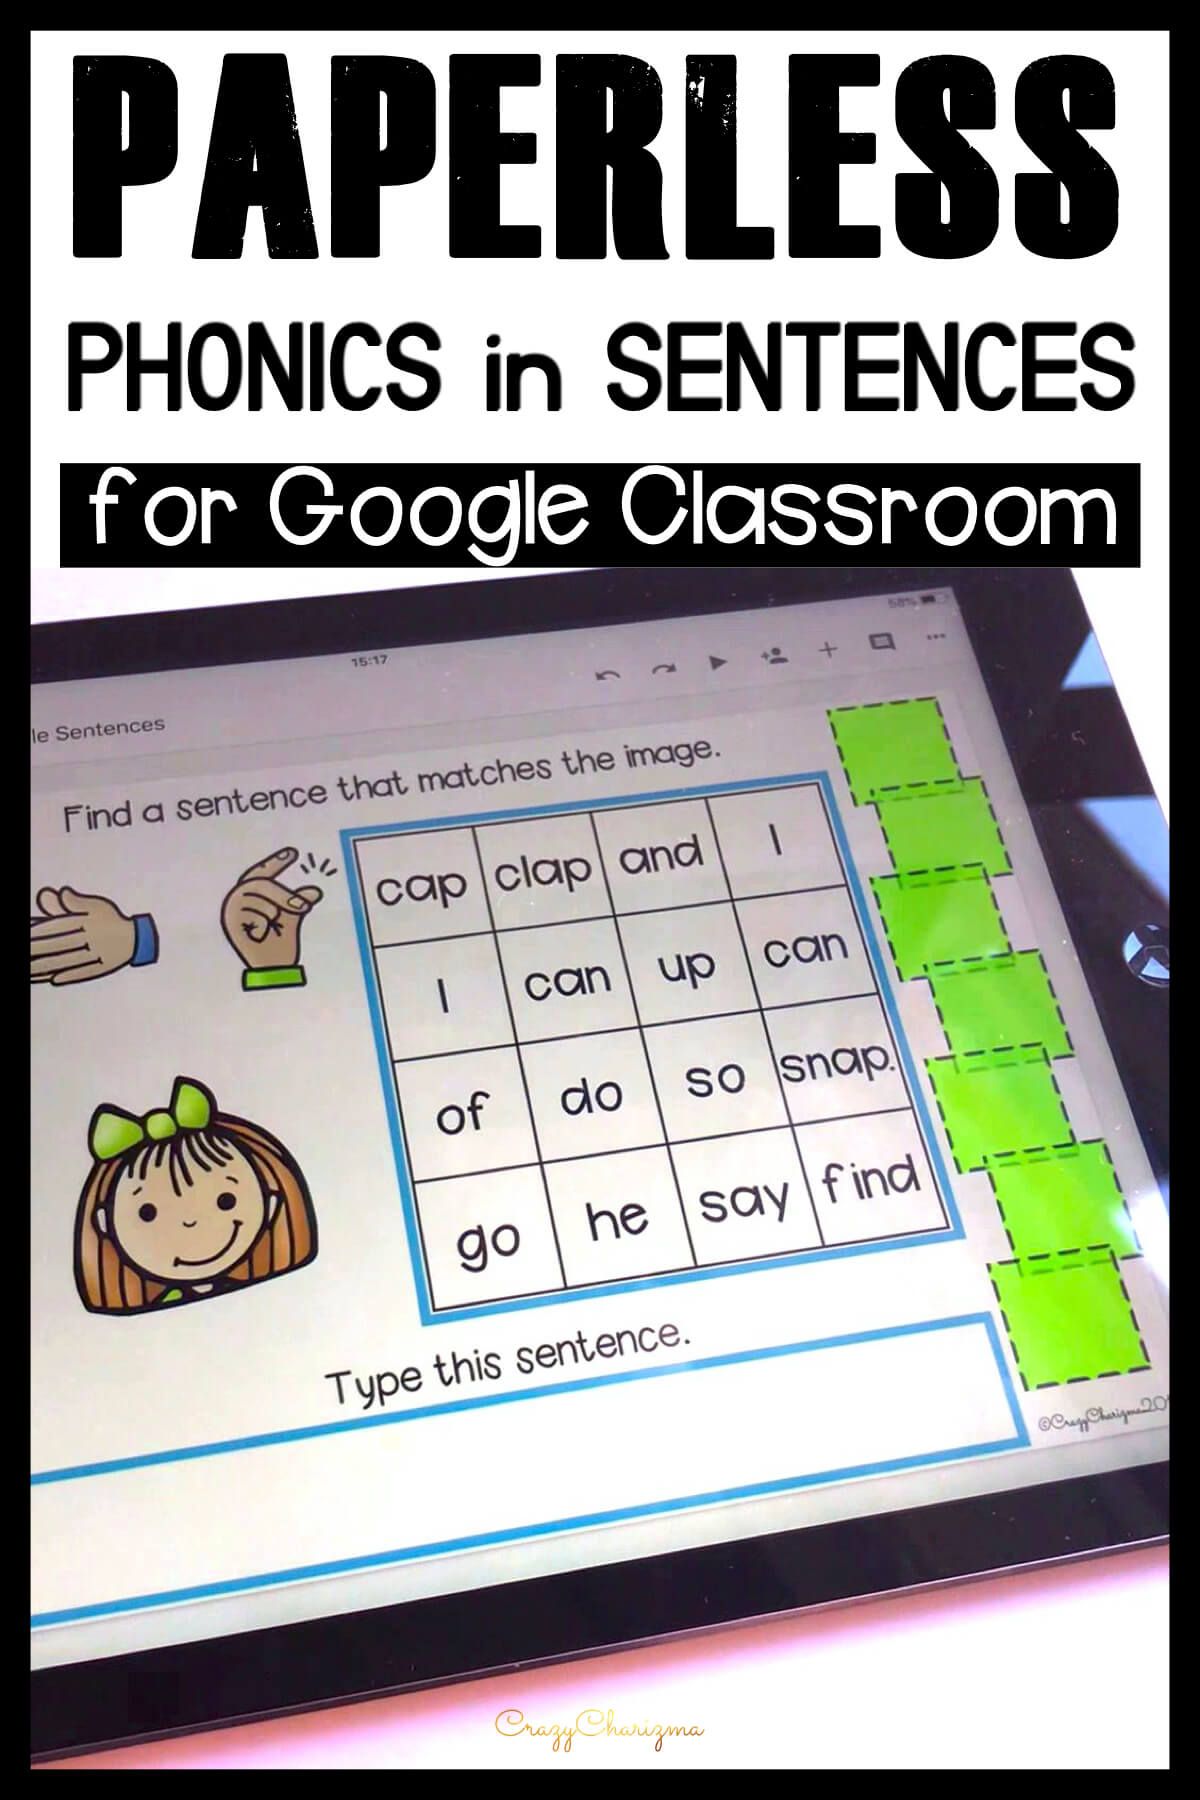 Google Classroom Activities for Kindergarten: Looking for Word Work activities? Need to practice sight words, word families and phonics? Use these reading activities for Google Classroom™. Perfect for guided reading groups, literacy centers and 1:1 work.